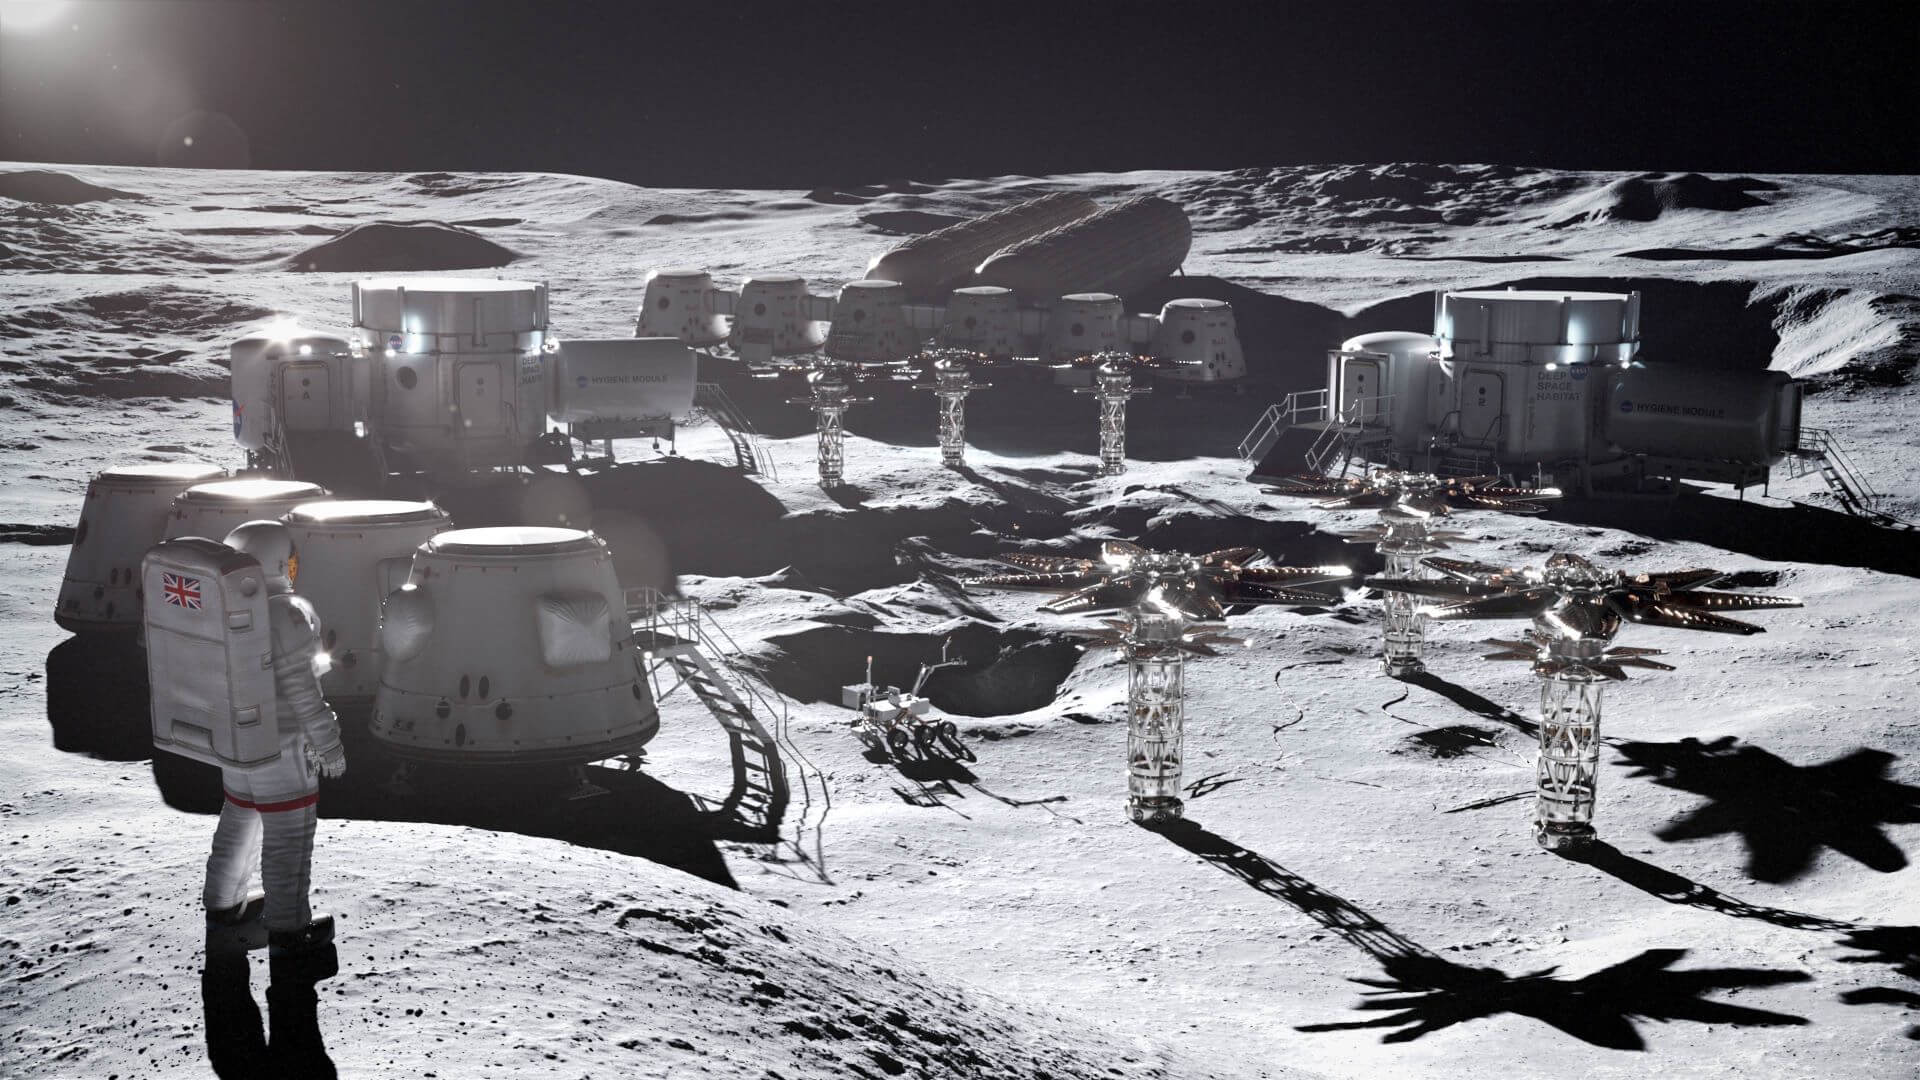 Artist's graphic of astronaut and nuclear reactor on the surface of the moon